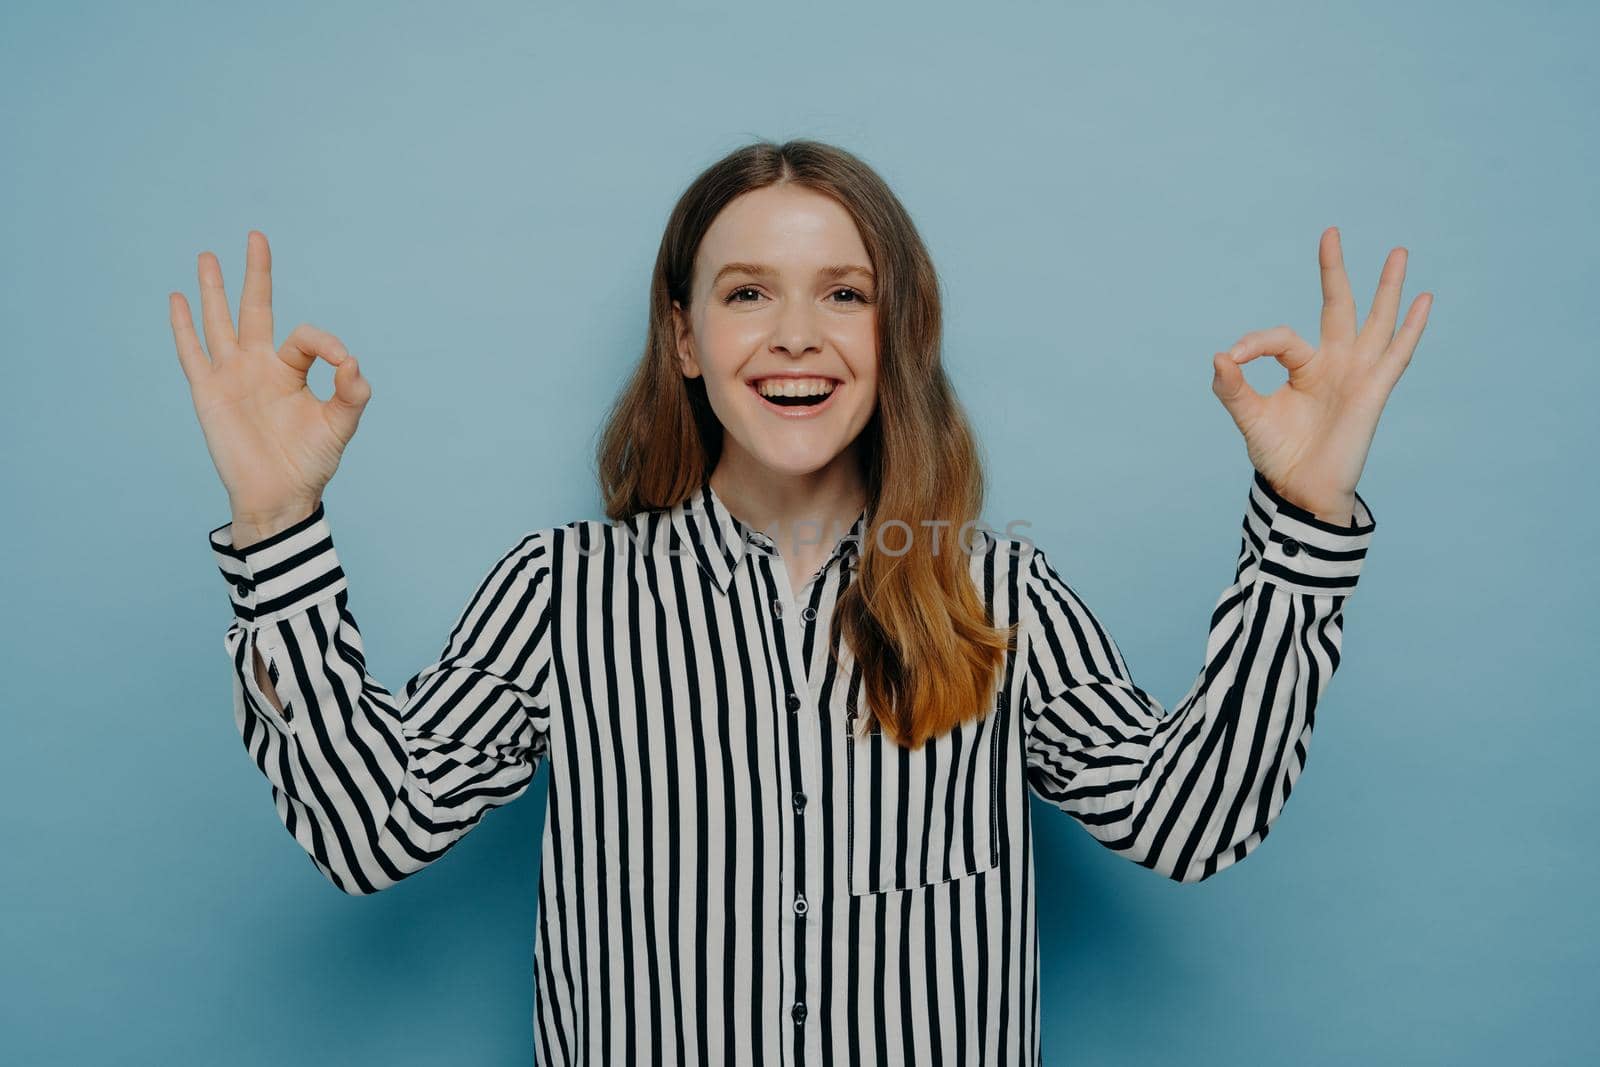 Laughing young female with wavy brown hair showing okay sign with both hands wearing striped black and white blouse while standing against blue wall in studio. Body language concept